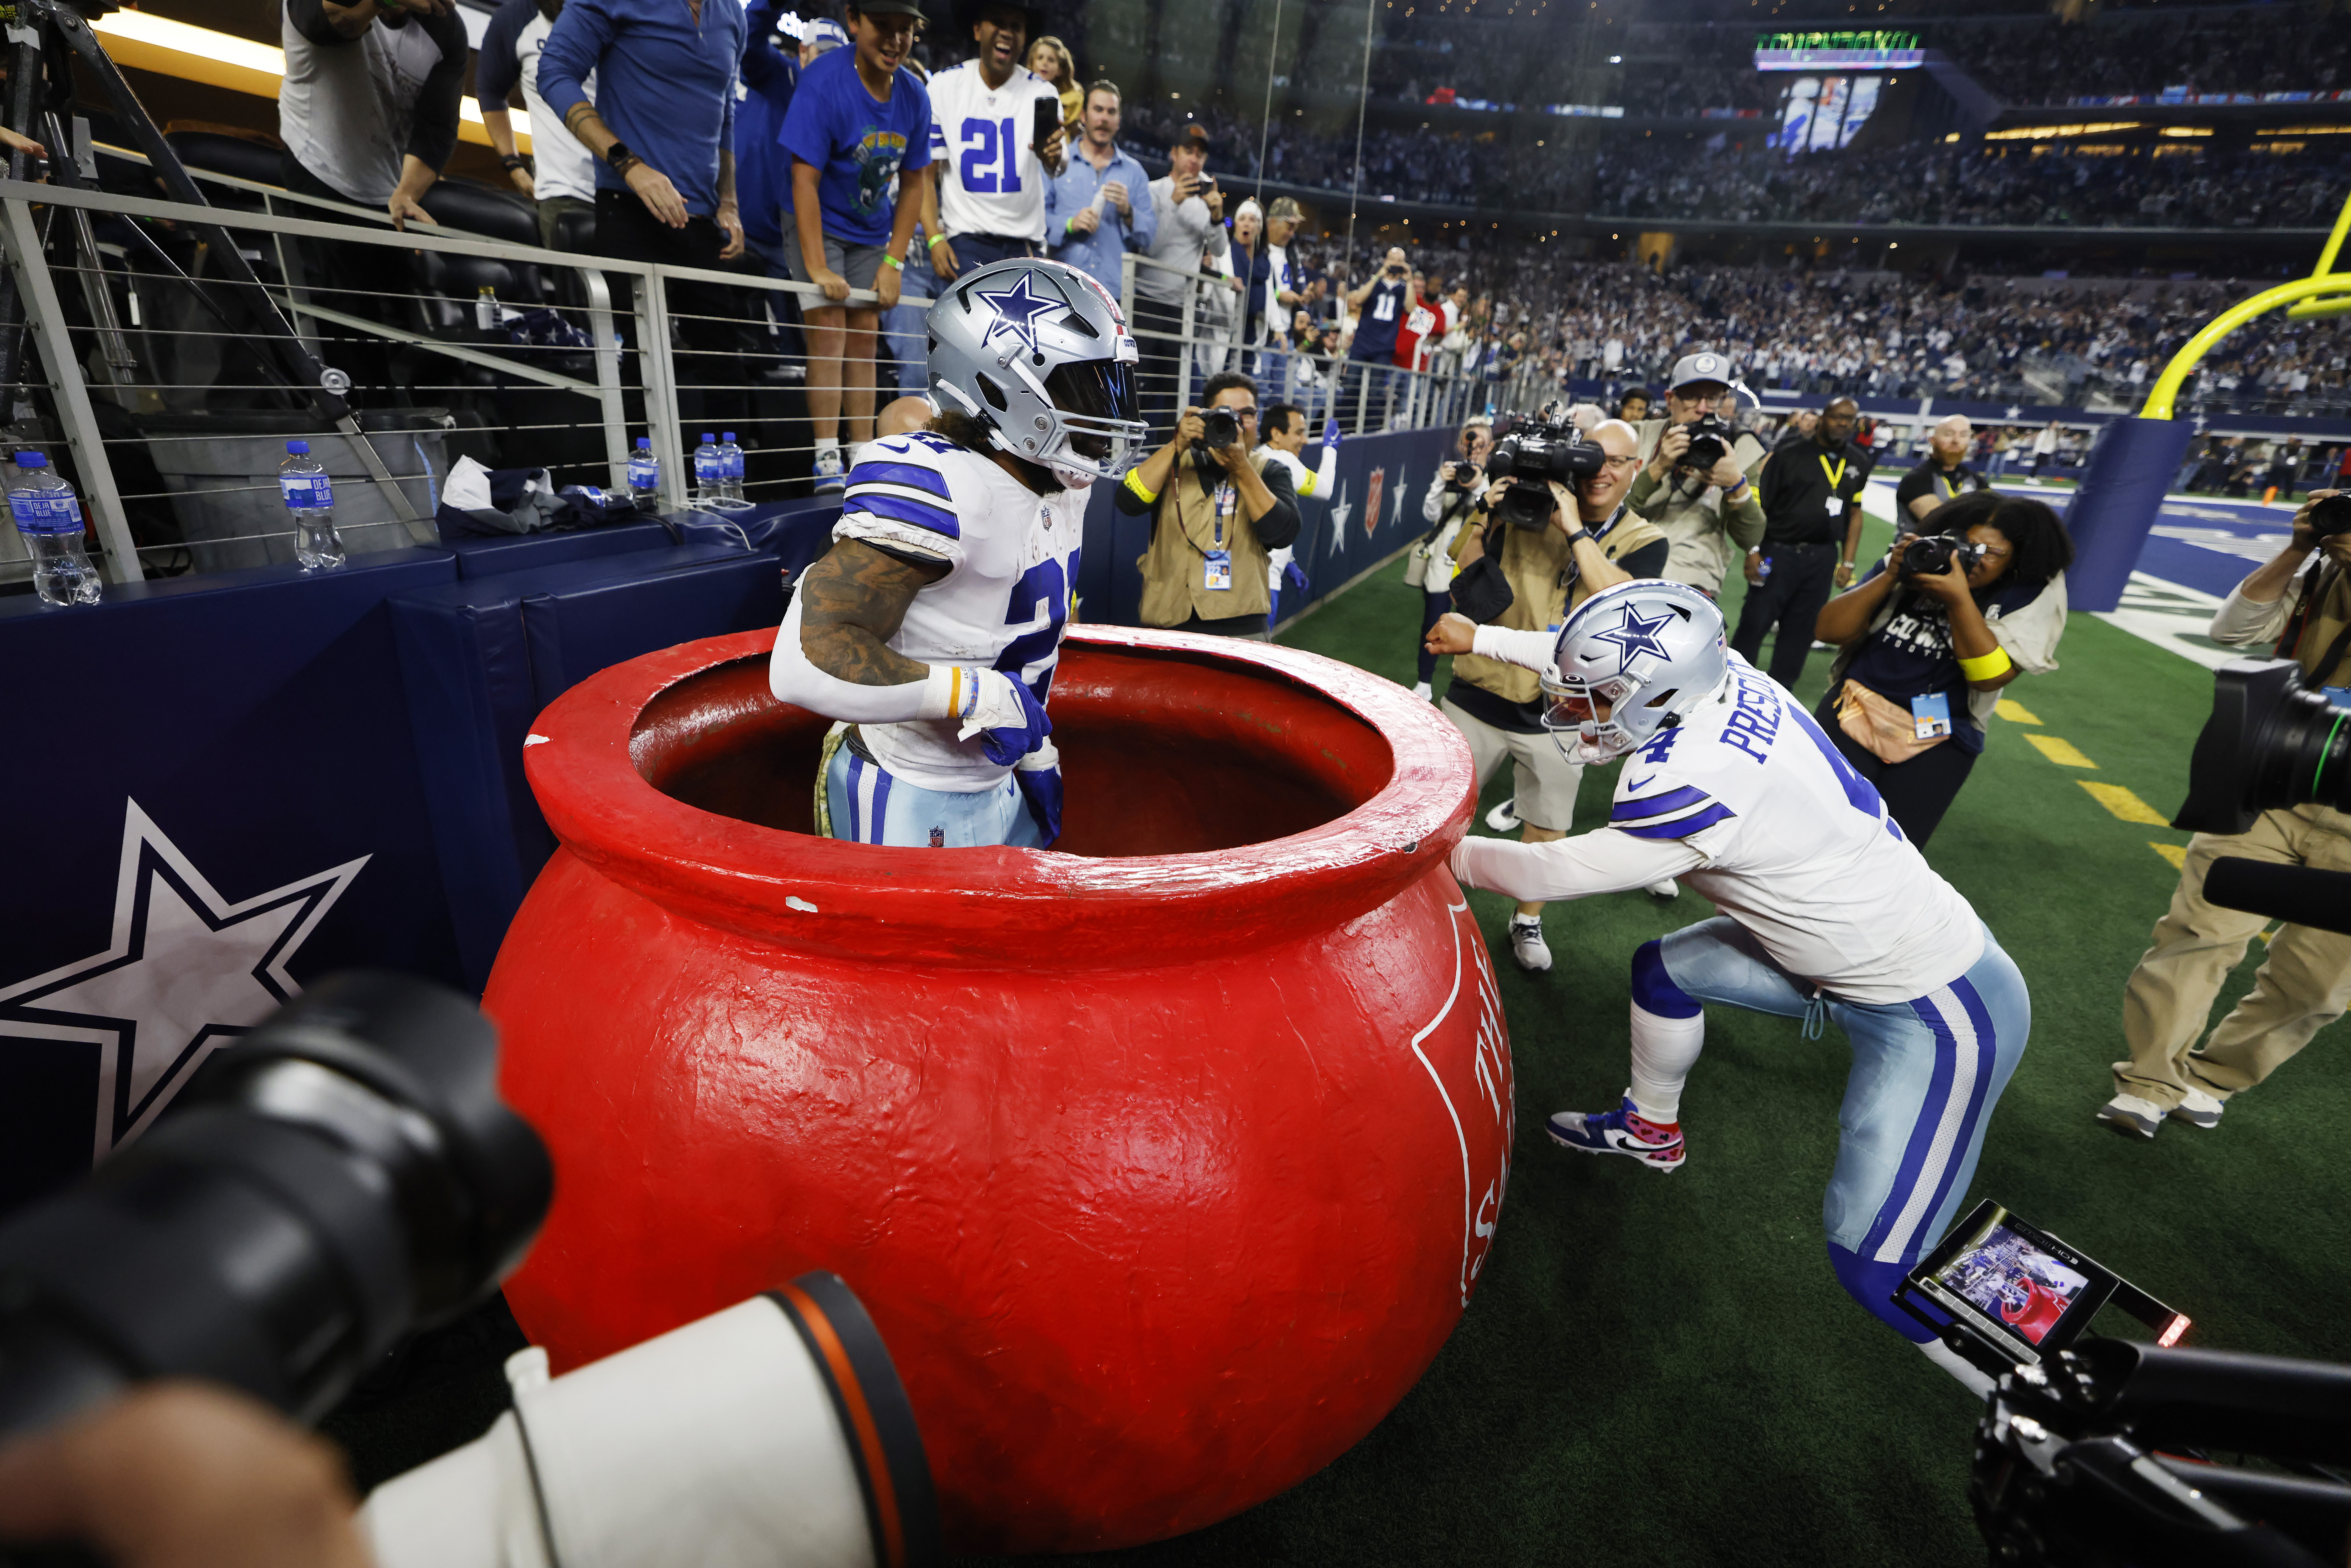 Cowboys TE blasted for two 'nonchalant plays